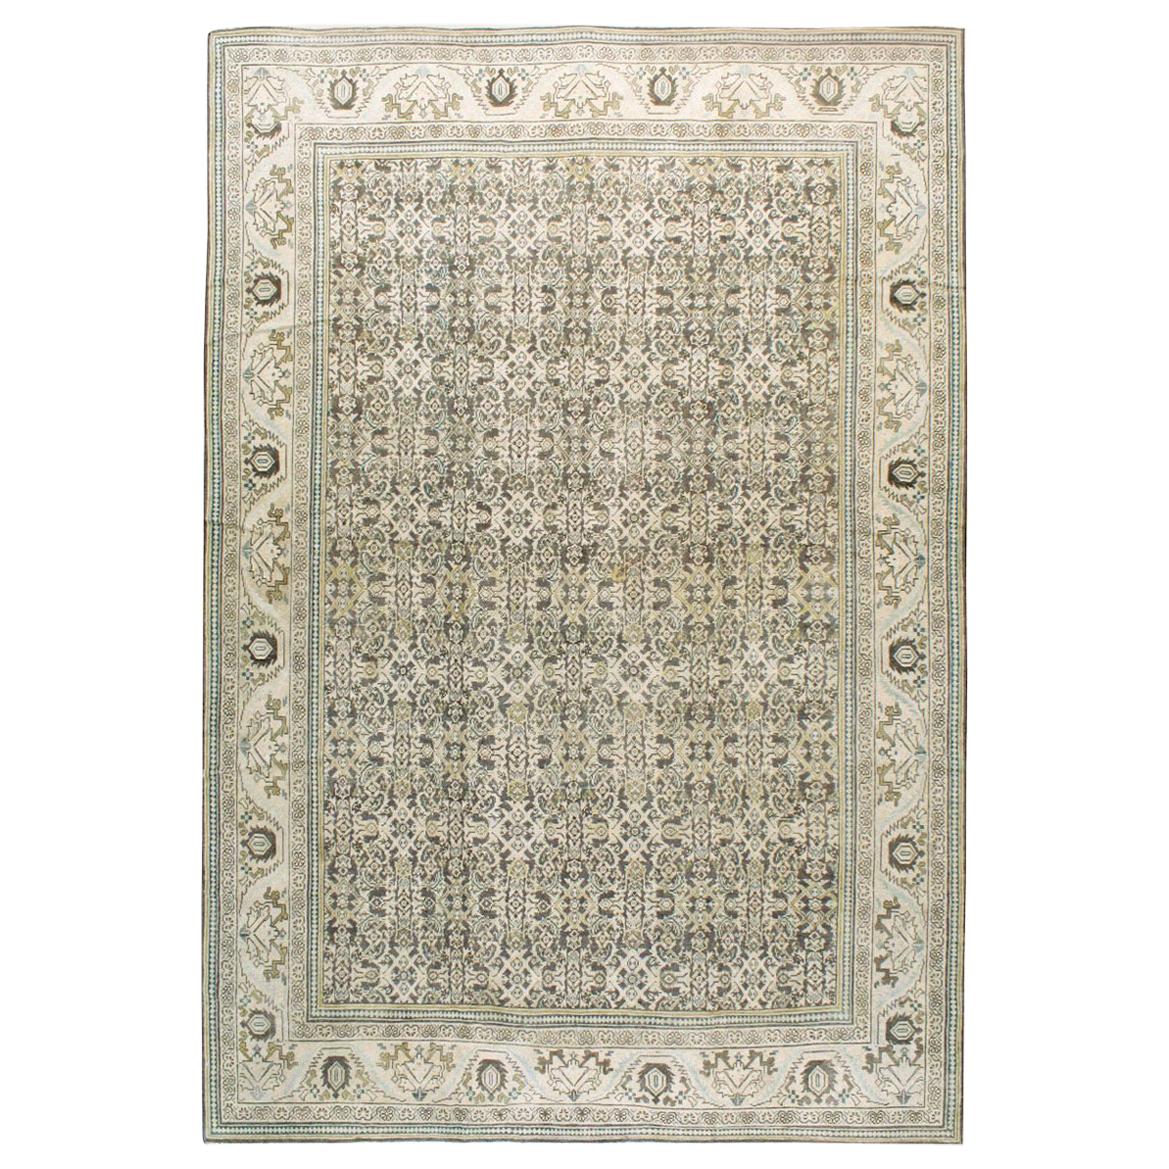 Midcentury Handmade Persian Room Size Rug in Neutral Earth Tones For Sale